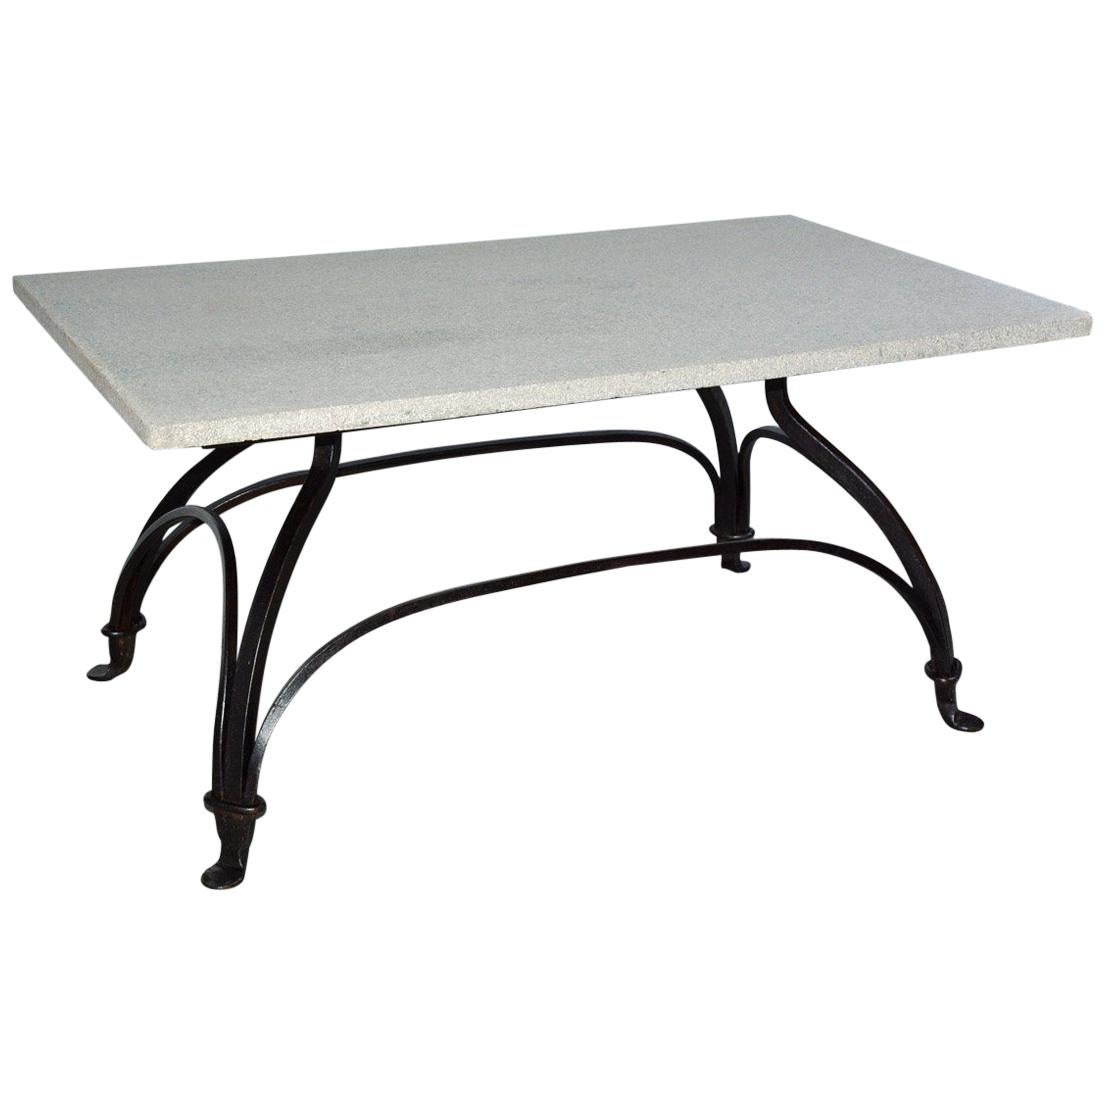 Marble and Wrought Iron Coffee Table